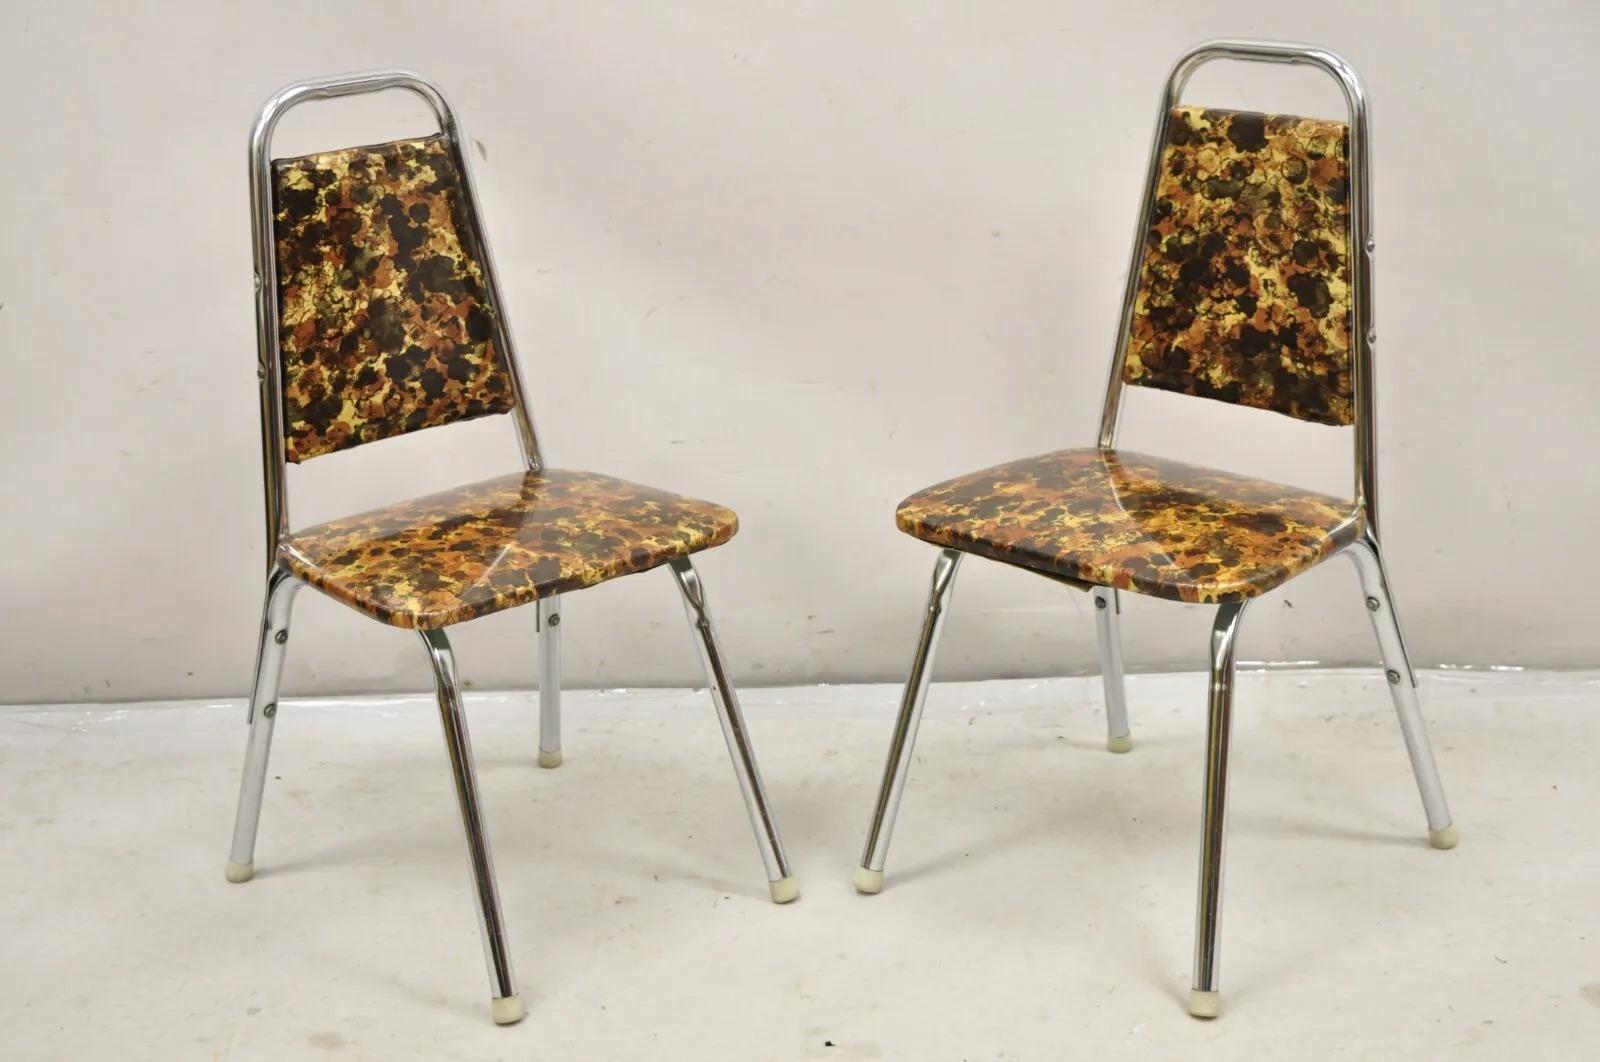 Vintage Children's Small Mid Century Tubular Metal Side Chairs - A Pair For Sale 5